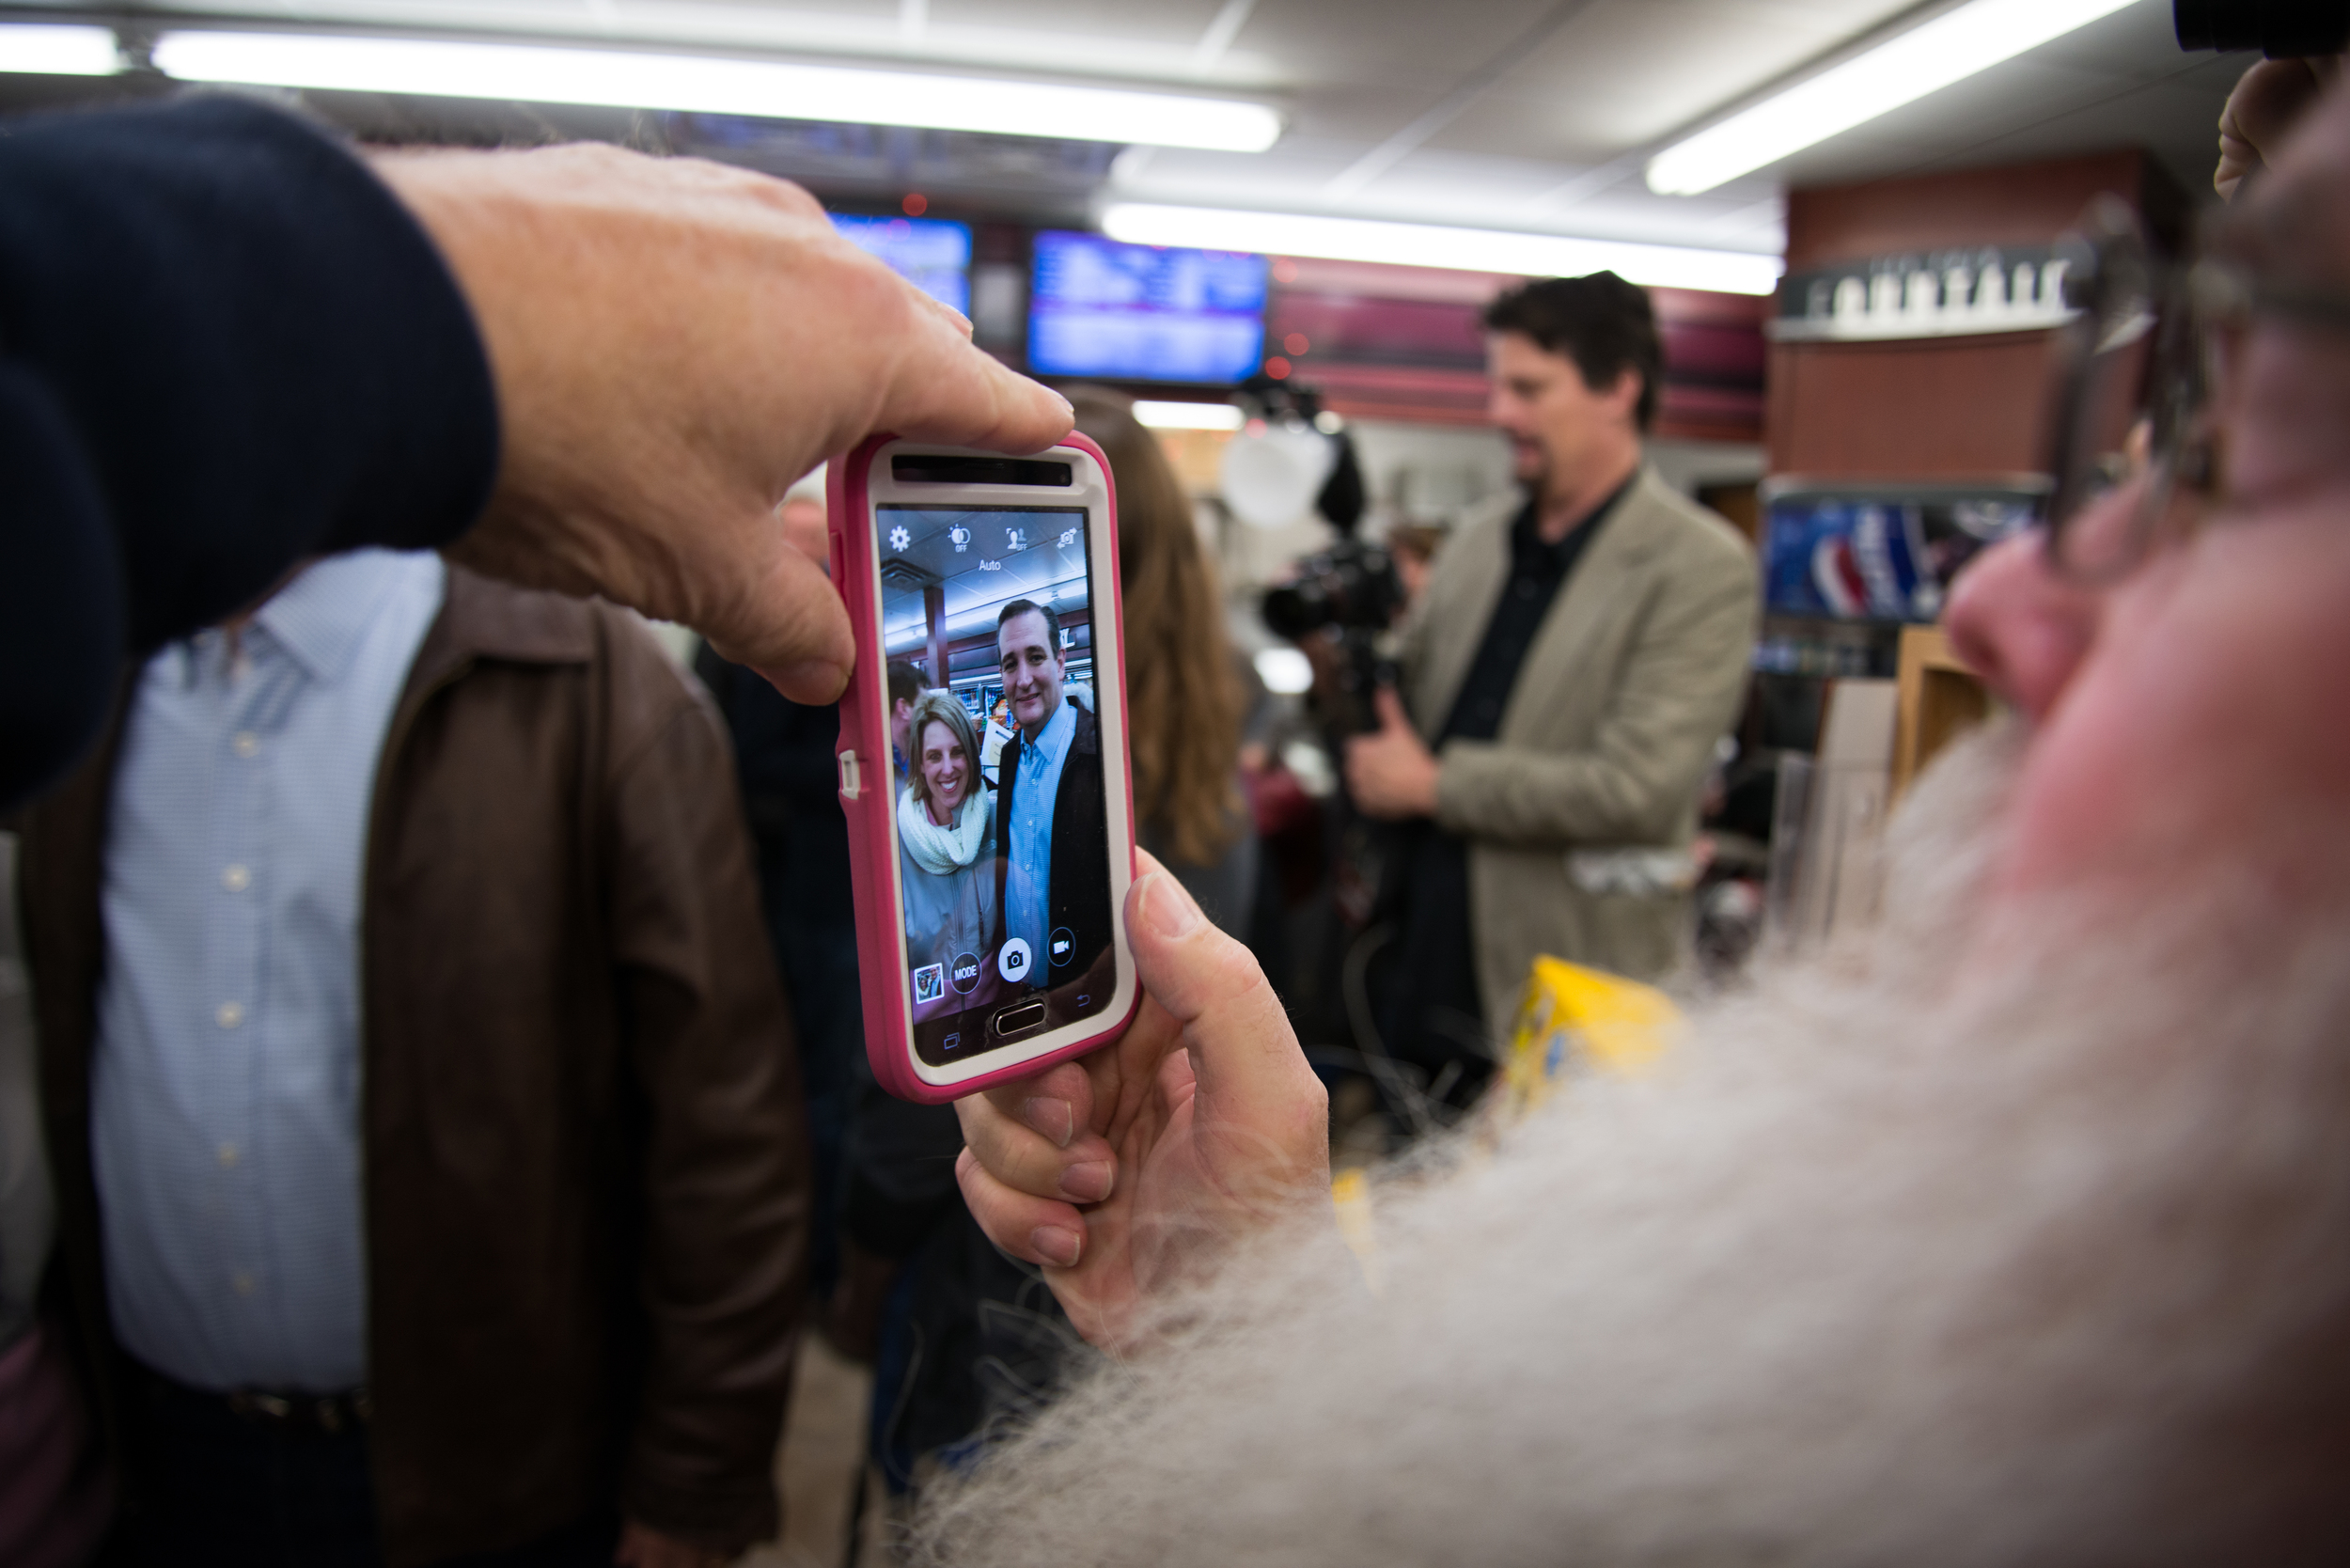  Republican presidential candidate Ted Cruz is seen through a cellphone screen as he poses for a photograph with a voter during a campaign stop at Casey’s General Store, in Tama, Iowa, on Nov. 29, 2015. 